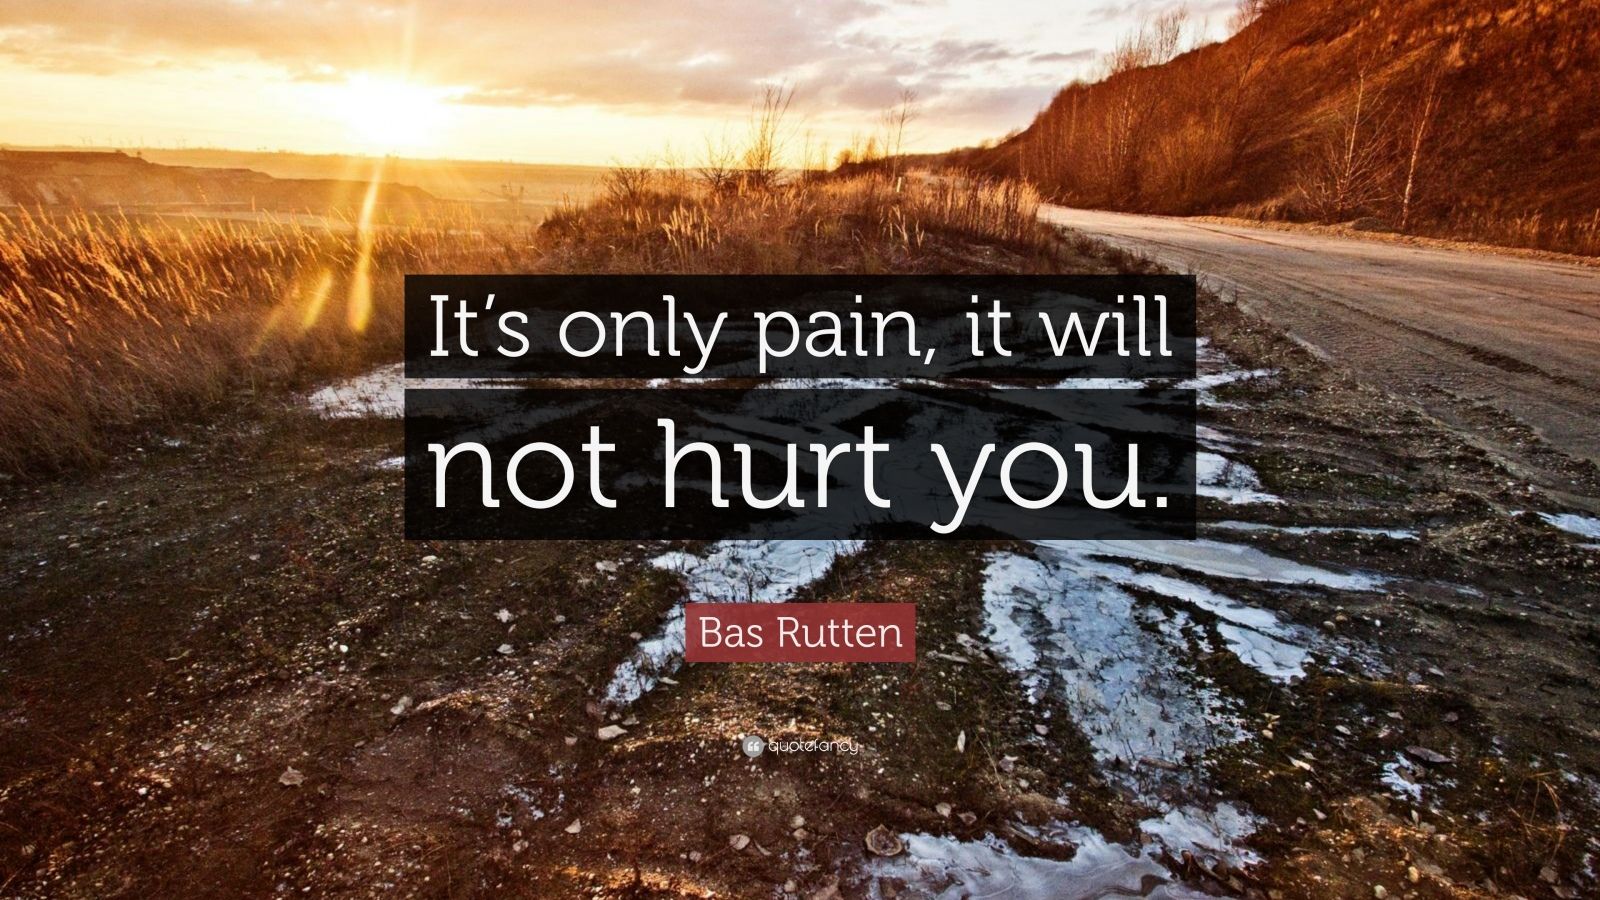 Bas Rutten Quote: “It’s only pain, it will not hurt you.”